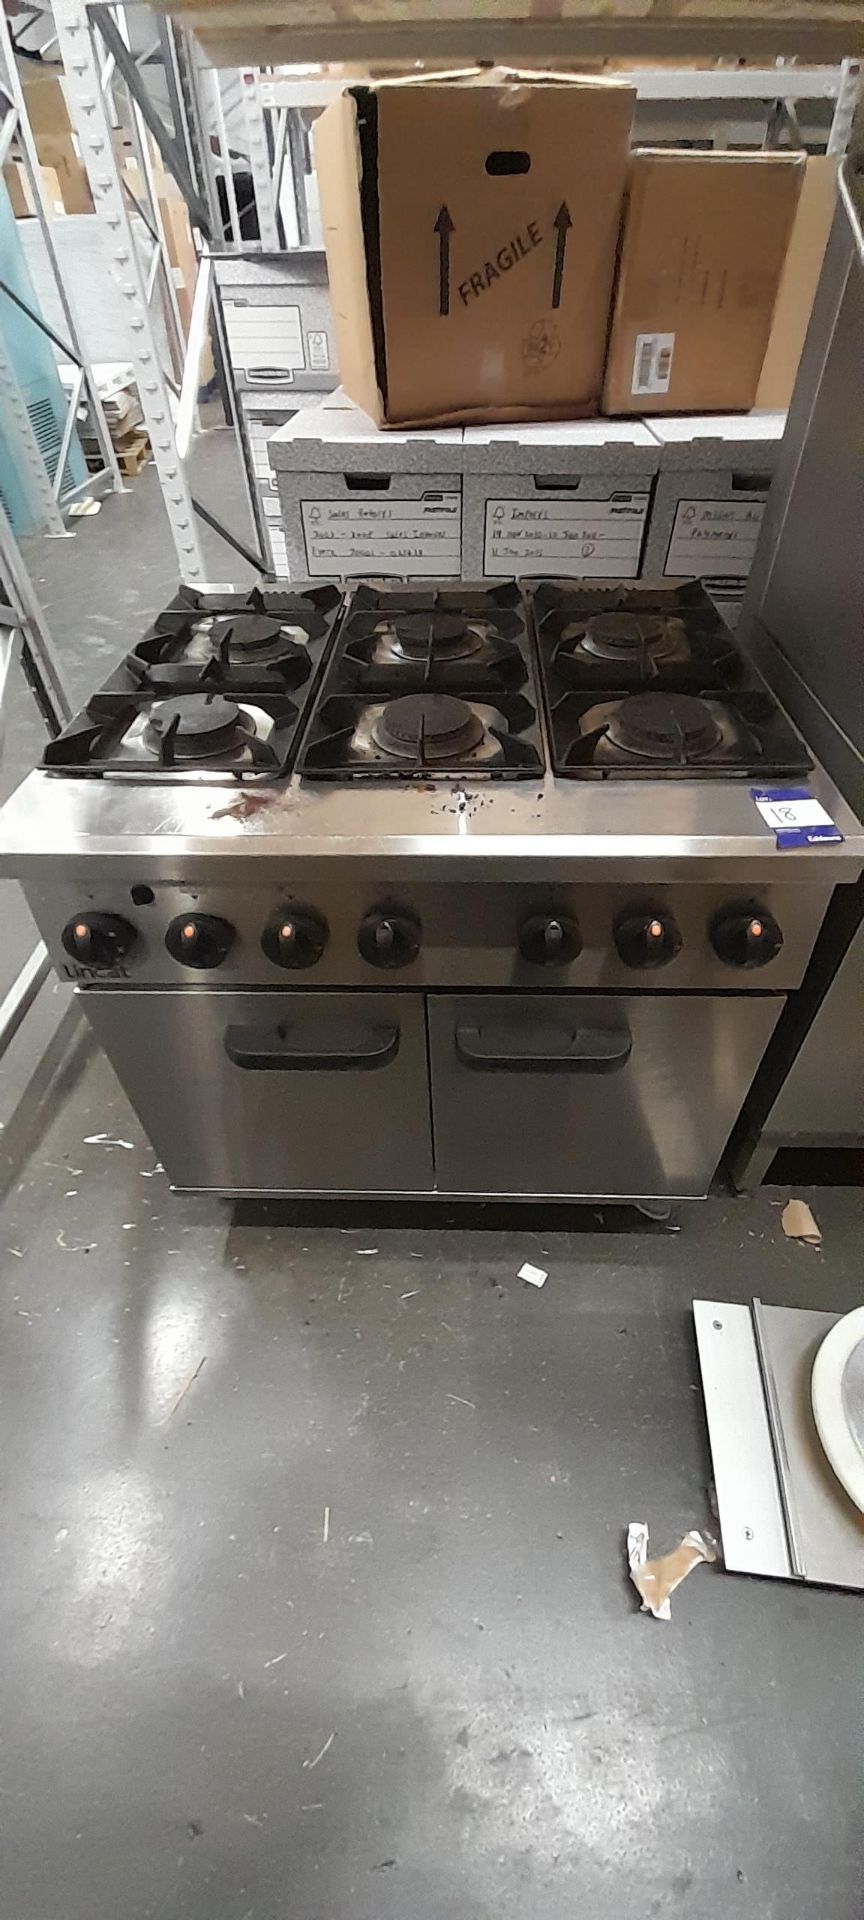 Lincat PHGR01/N Gas Fired 6 Burner With Oven Underneath, October 2019. s/n 30249885